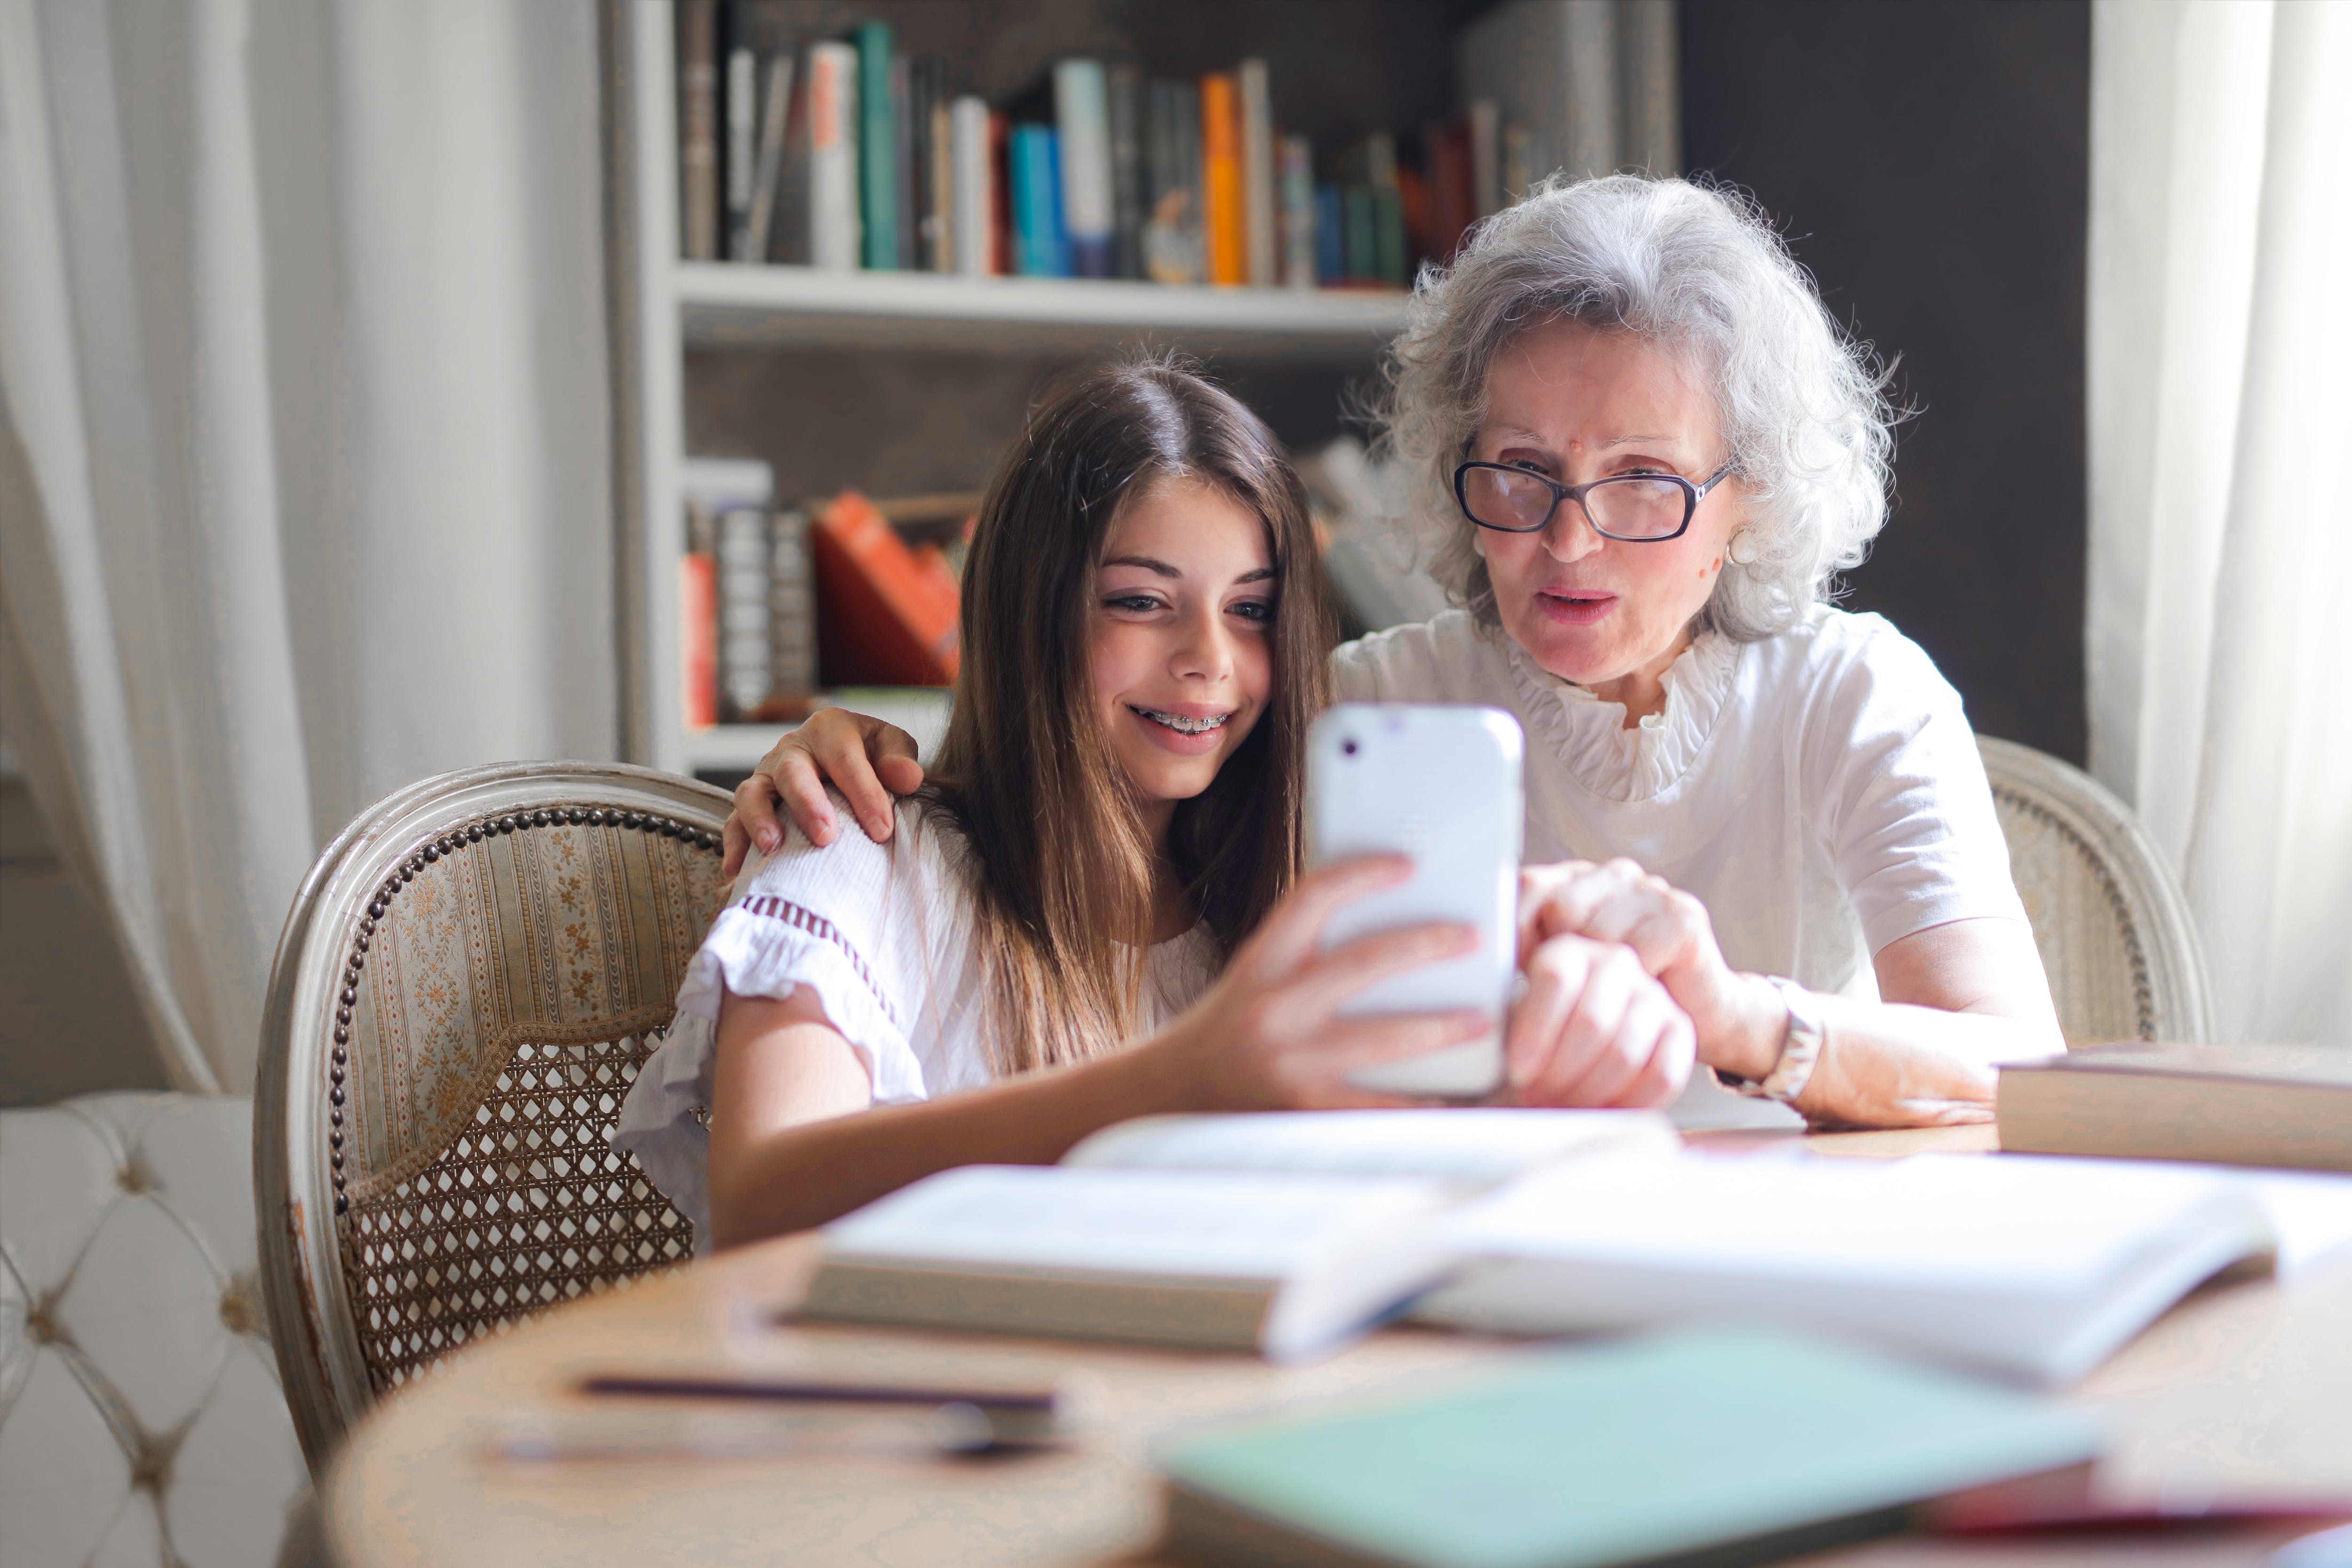 A grandparent sitting and bonding with her granddaughter over something on the child's cell phone | Source: Pexels